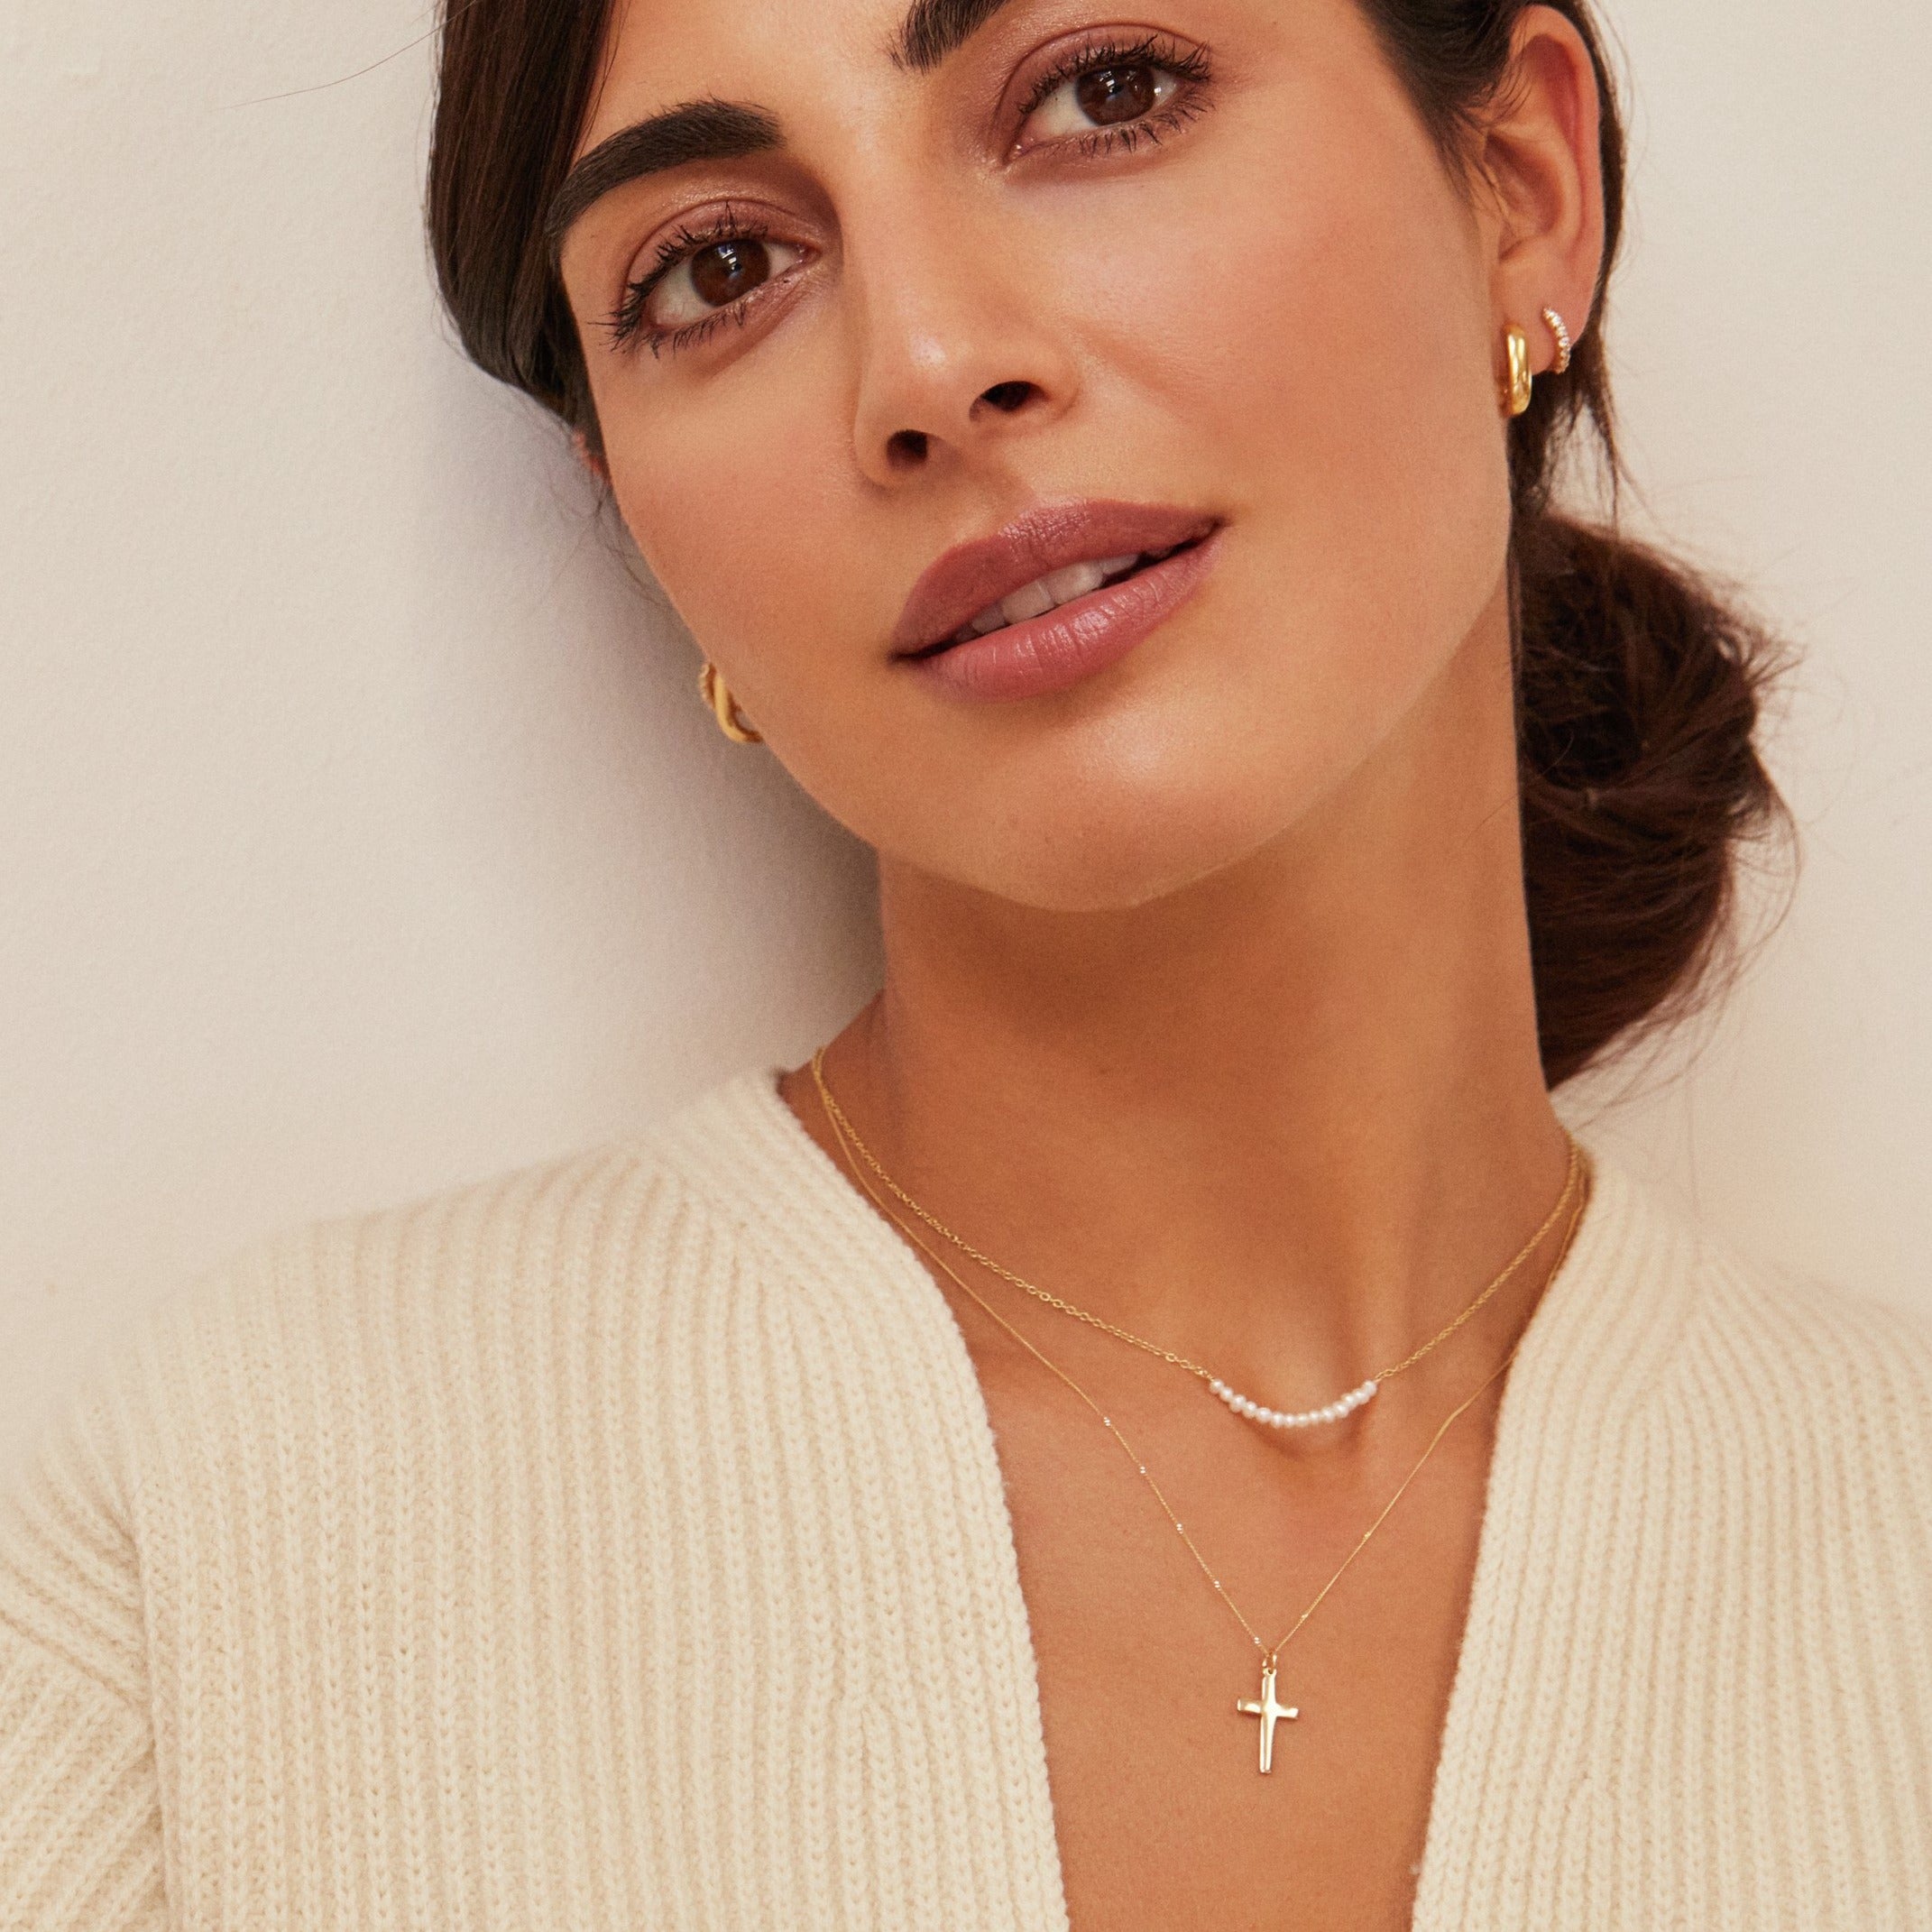 Brunette woman wearing a gold small pearl cluster choker around her neck layered with a gold cross pendant necklace and gold thick squared hoop earrings in her ears